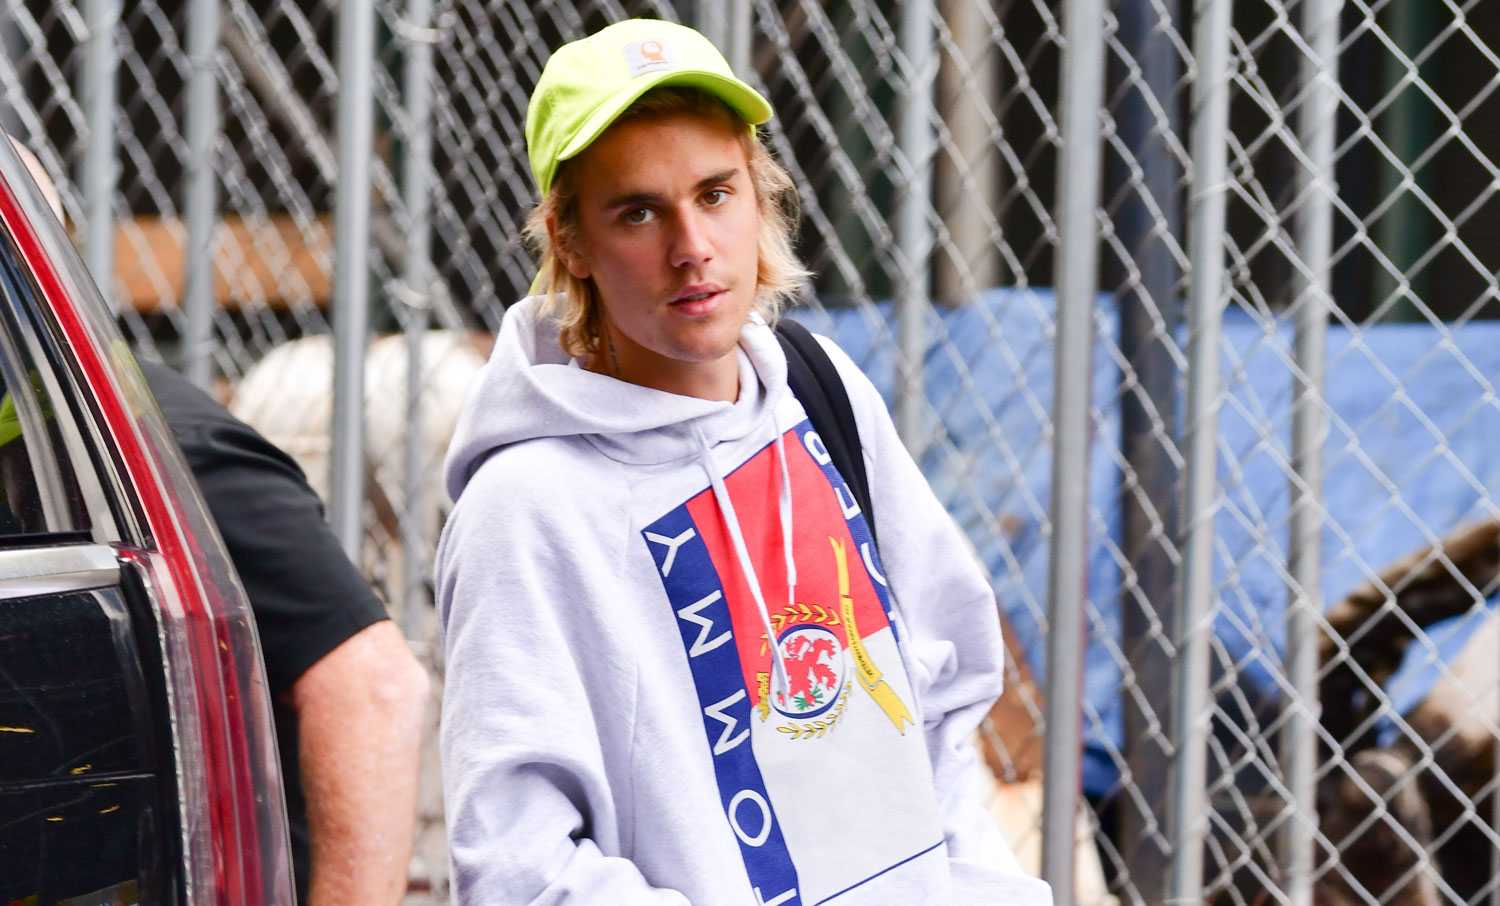 Justin Bieber Is Singlehandedly Bringing Back This 90s Boy Band Look